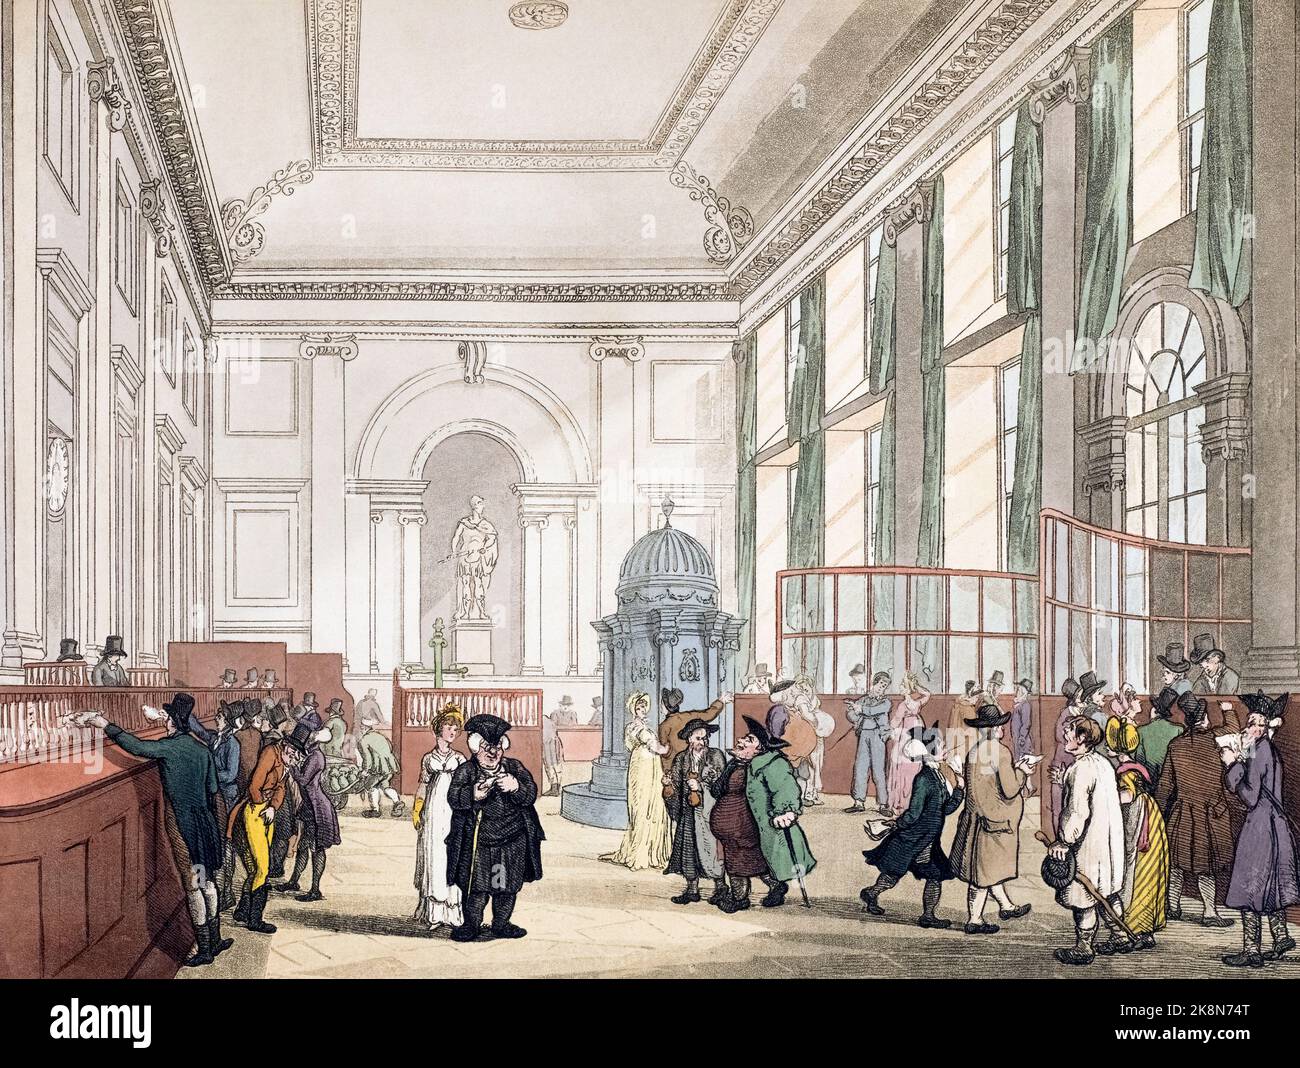 The Great Hall, Bank of England.  Circa 1808.  After a work by August Pugin and Thomas Rowlandson in the Microcosm of London, published in three volumes between 1808 and 1810 by Rudolph Ackermann.   Pugin was the artist responsible for the architectural elements in the Microcosm pictures; Thomas Rowlandson was hired to add the lively human figures. Stock Photo